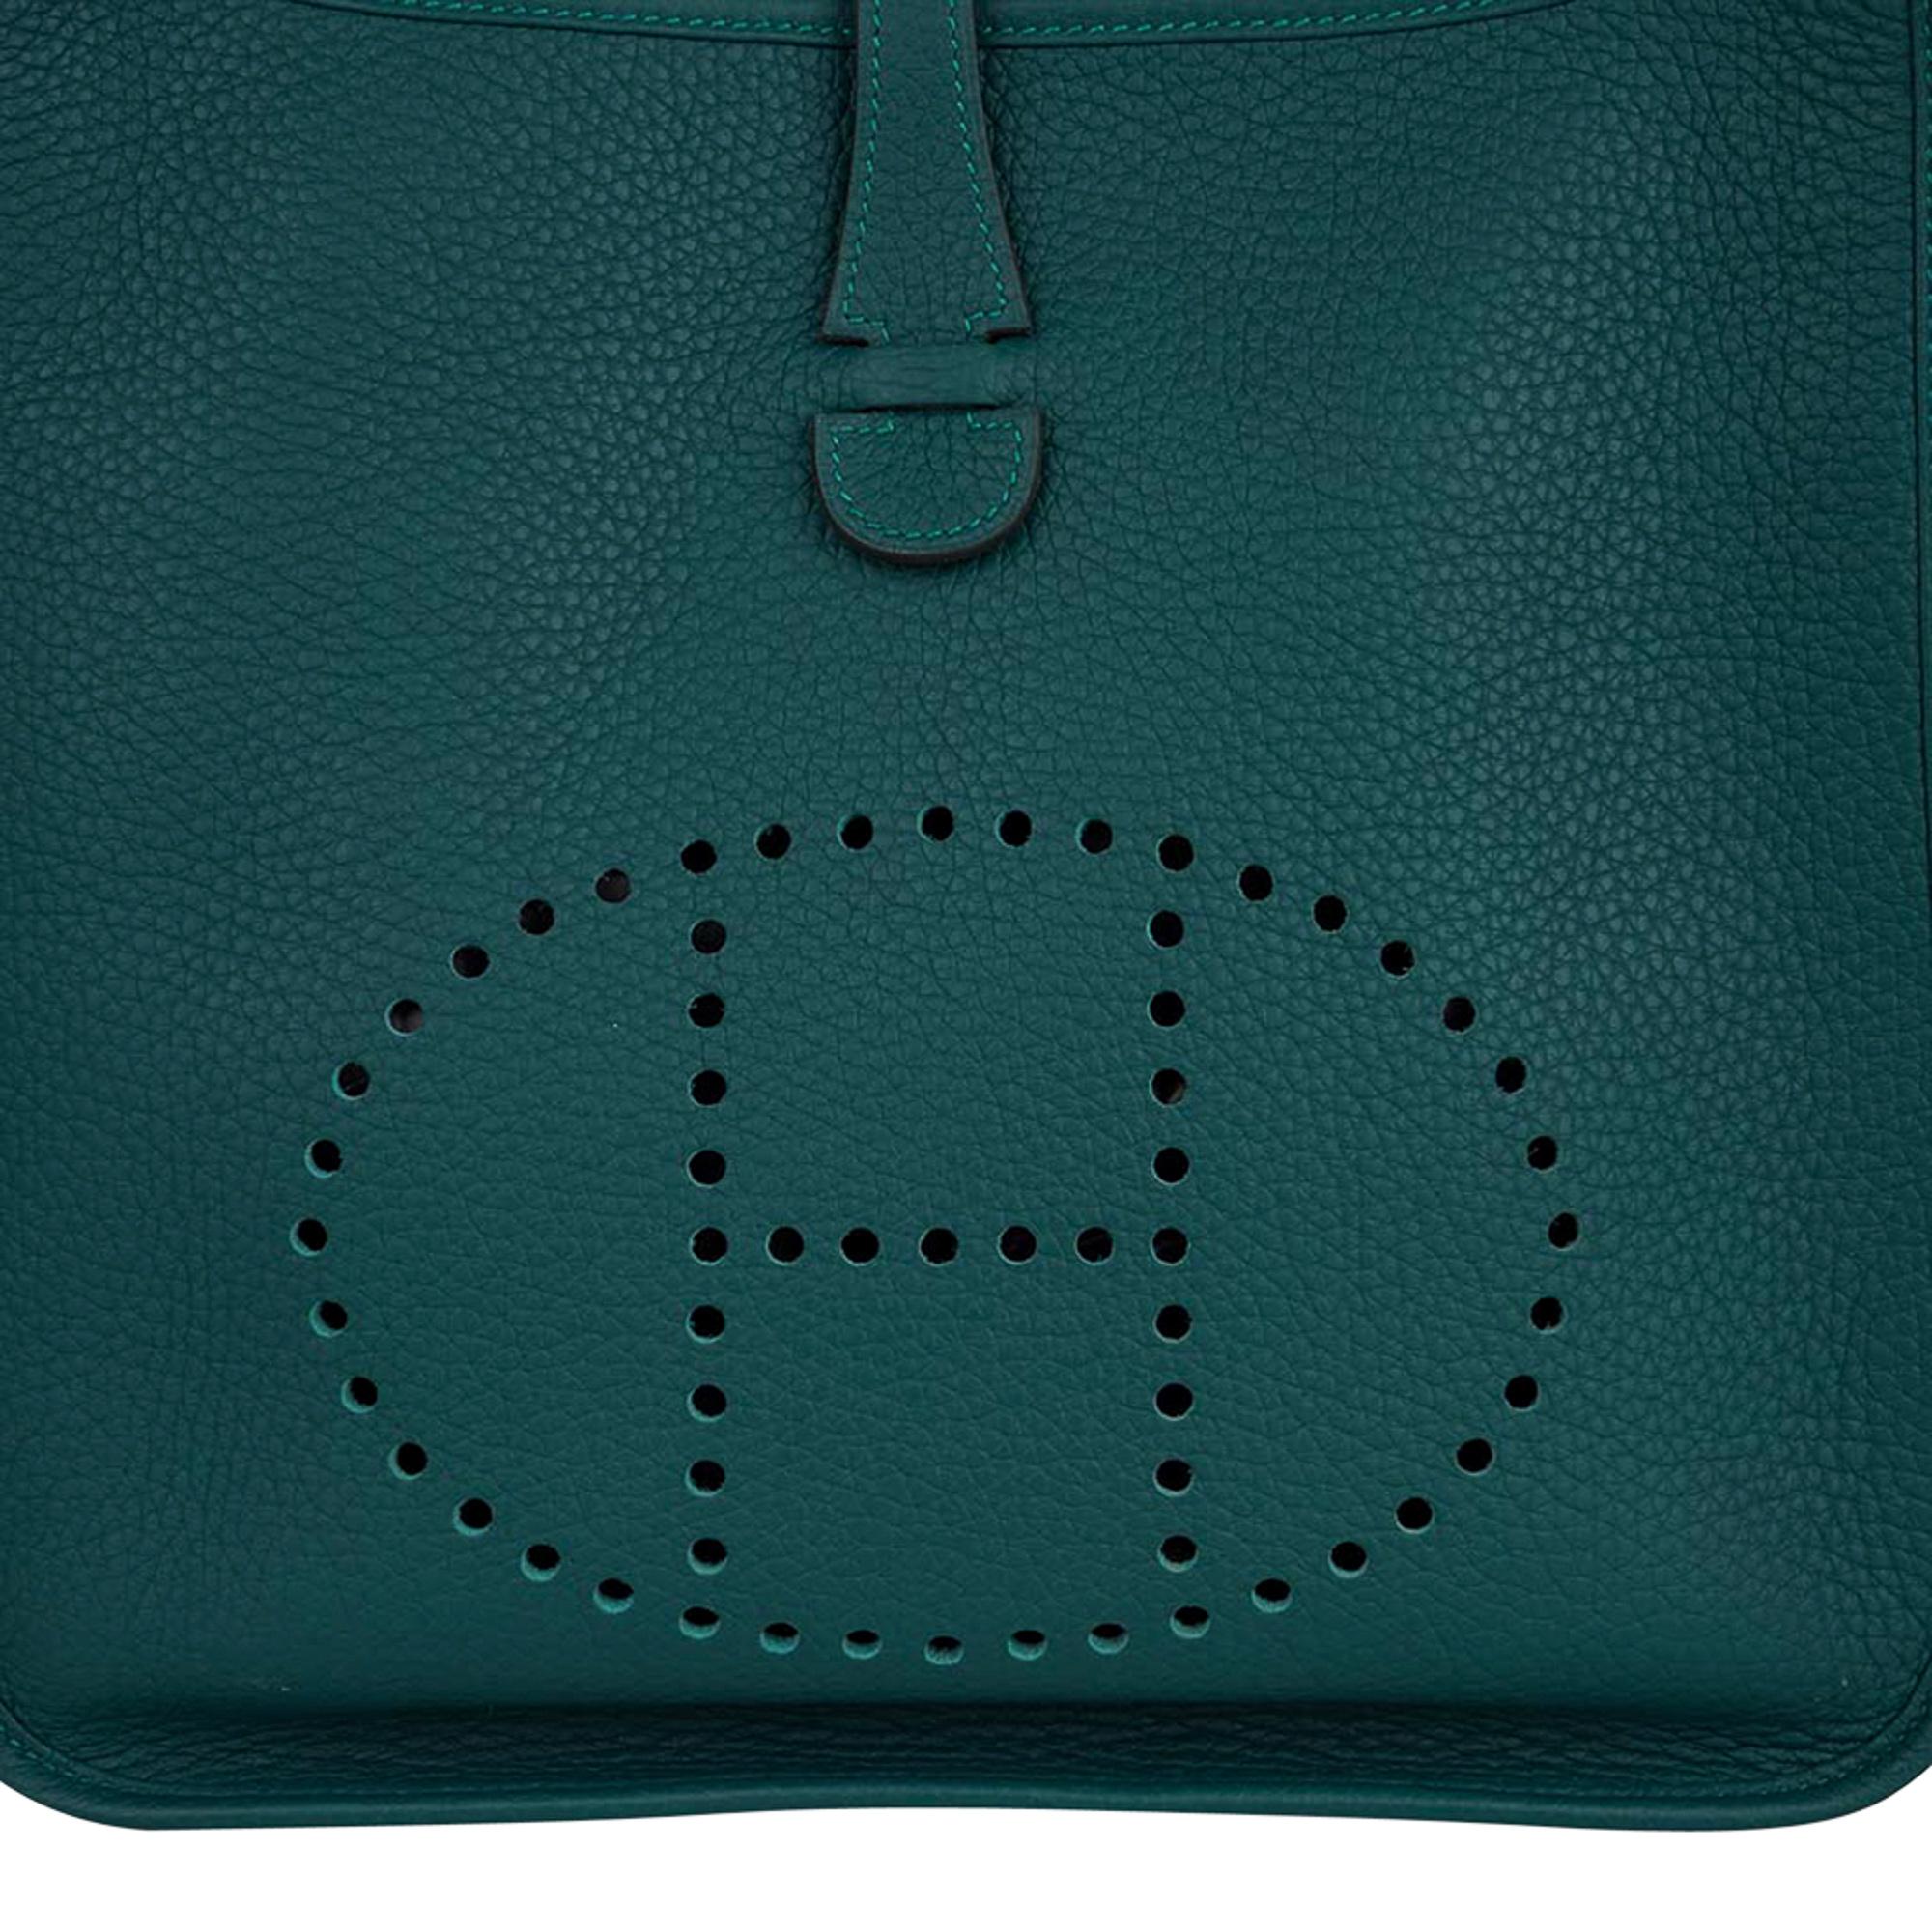 Mightychic offers a guaranteed authentic Hermes Evelyne PM featured in Malachite clemence leather.
Fresh with Palladium hardware.
Fabulous shoulder or cross body bag with roomy interior and rear outside deep pocket.
Sport strap in textile with